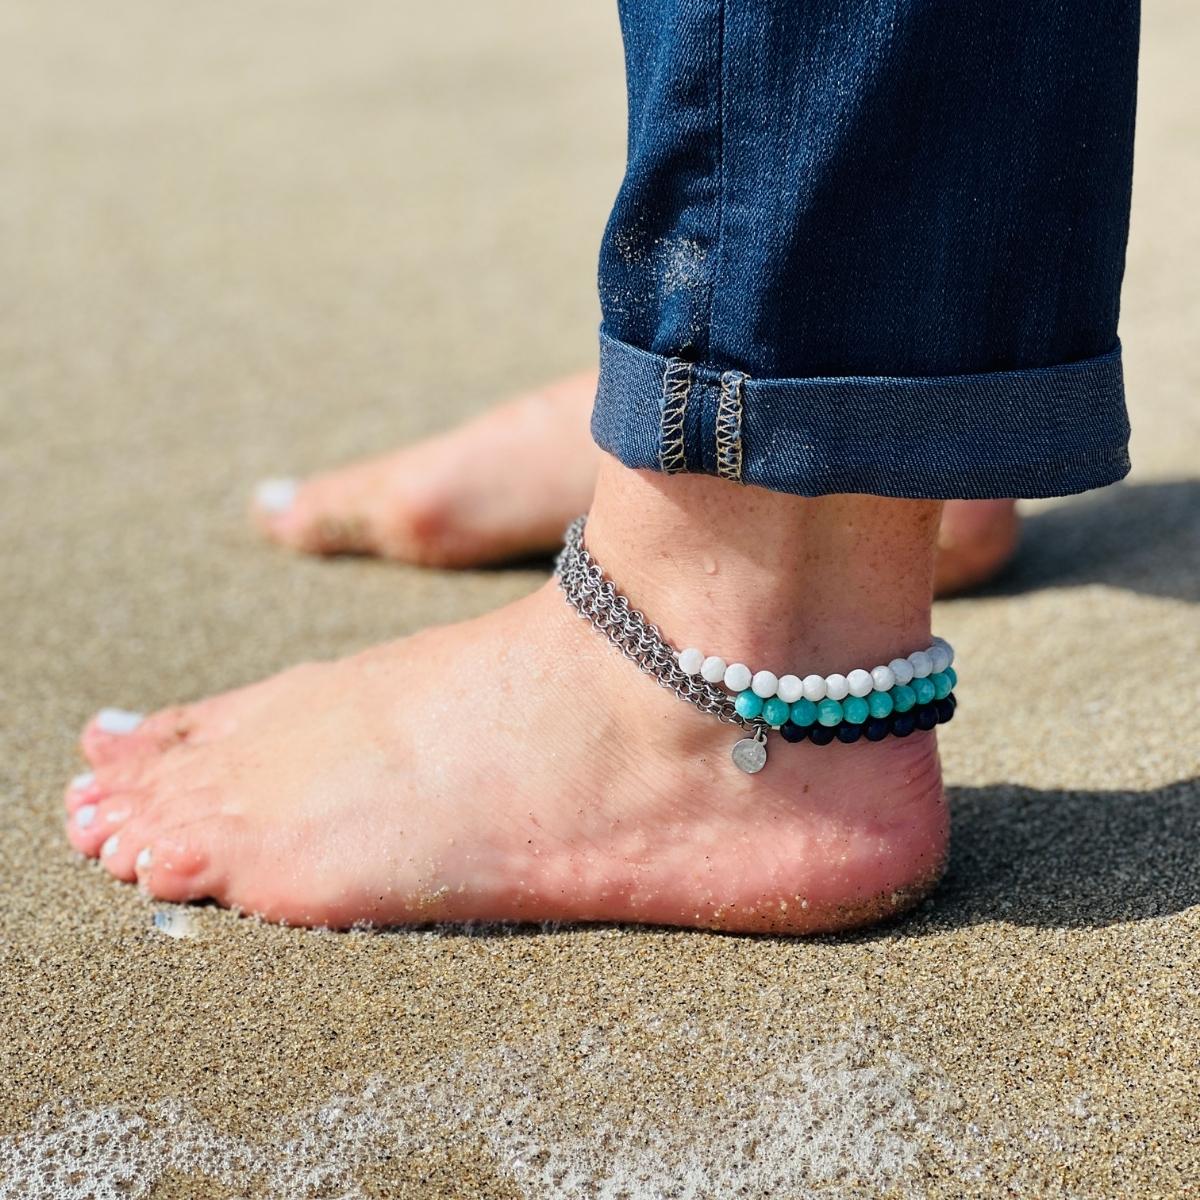 Neptunic SharkSuit Anklet - Sustainable Fashion for Ocean Lovers. Amazonite empowers one to search the self and discover one’s own truths and integrity, and to move beyond fear of judgment. Wear this crystal healing anklet and feel the empowering energies every step you take!